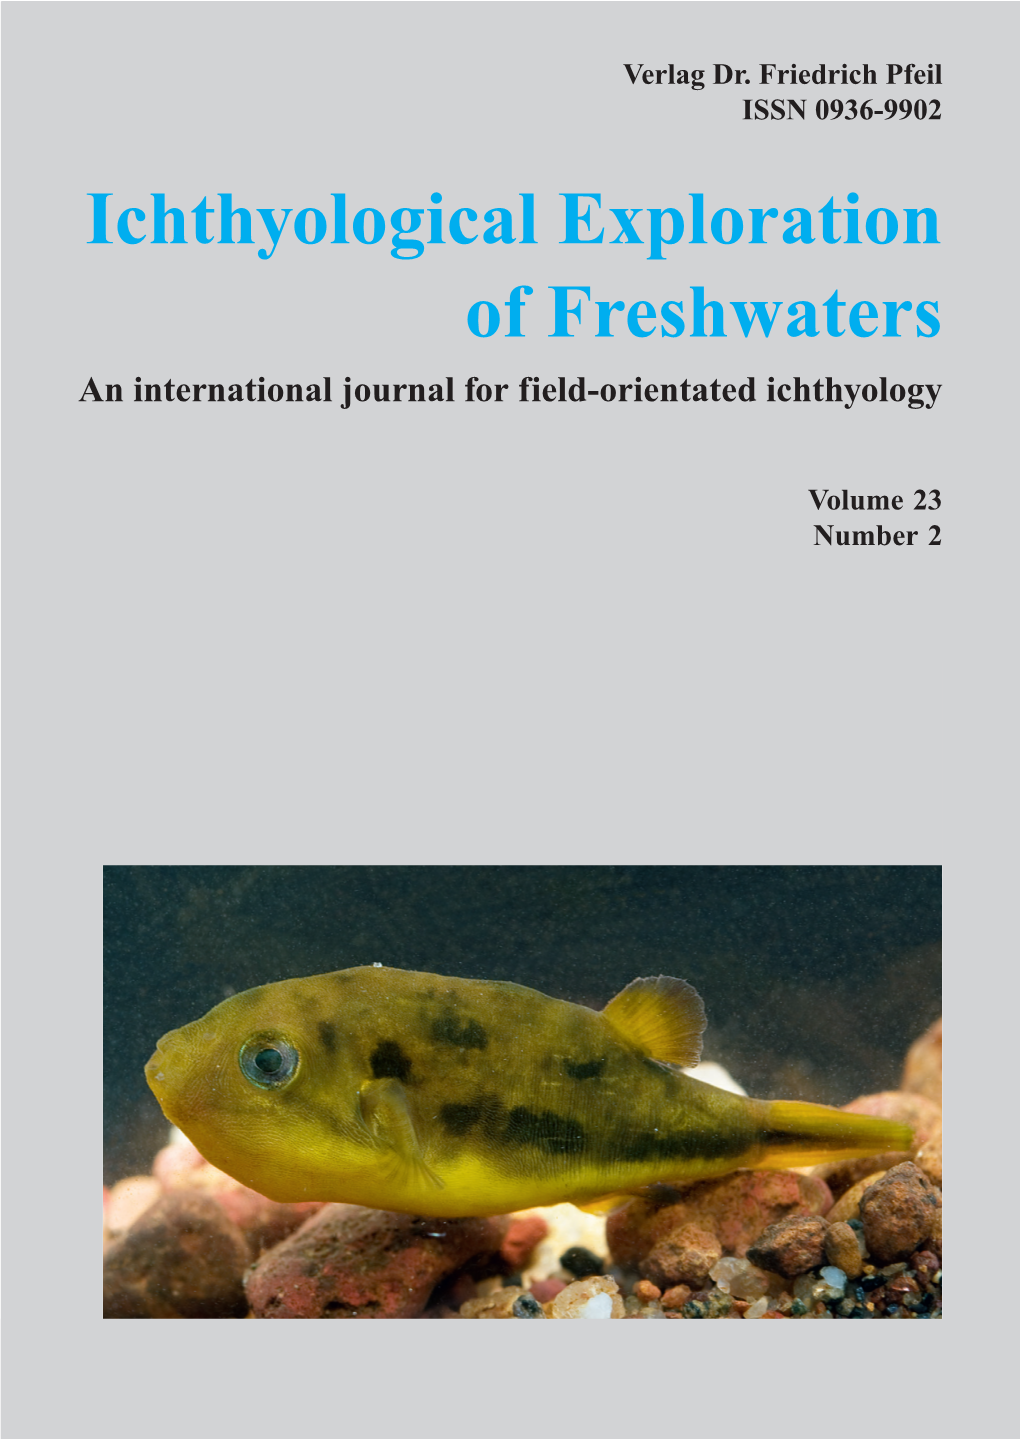 Ichthyological Exploration of Freshwaters an International Journal for Field-Orientated Ichthyology